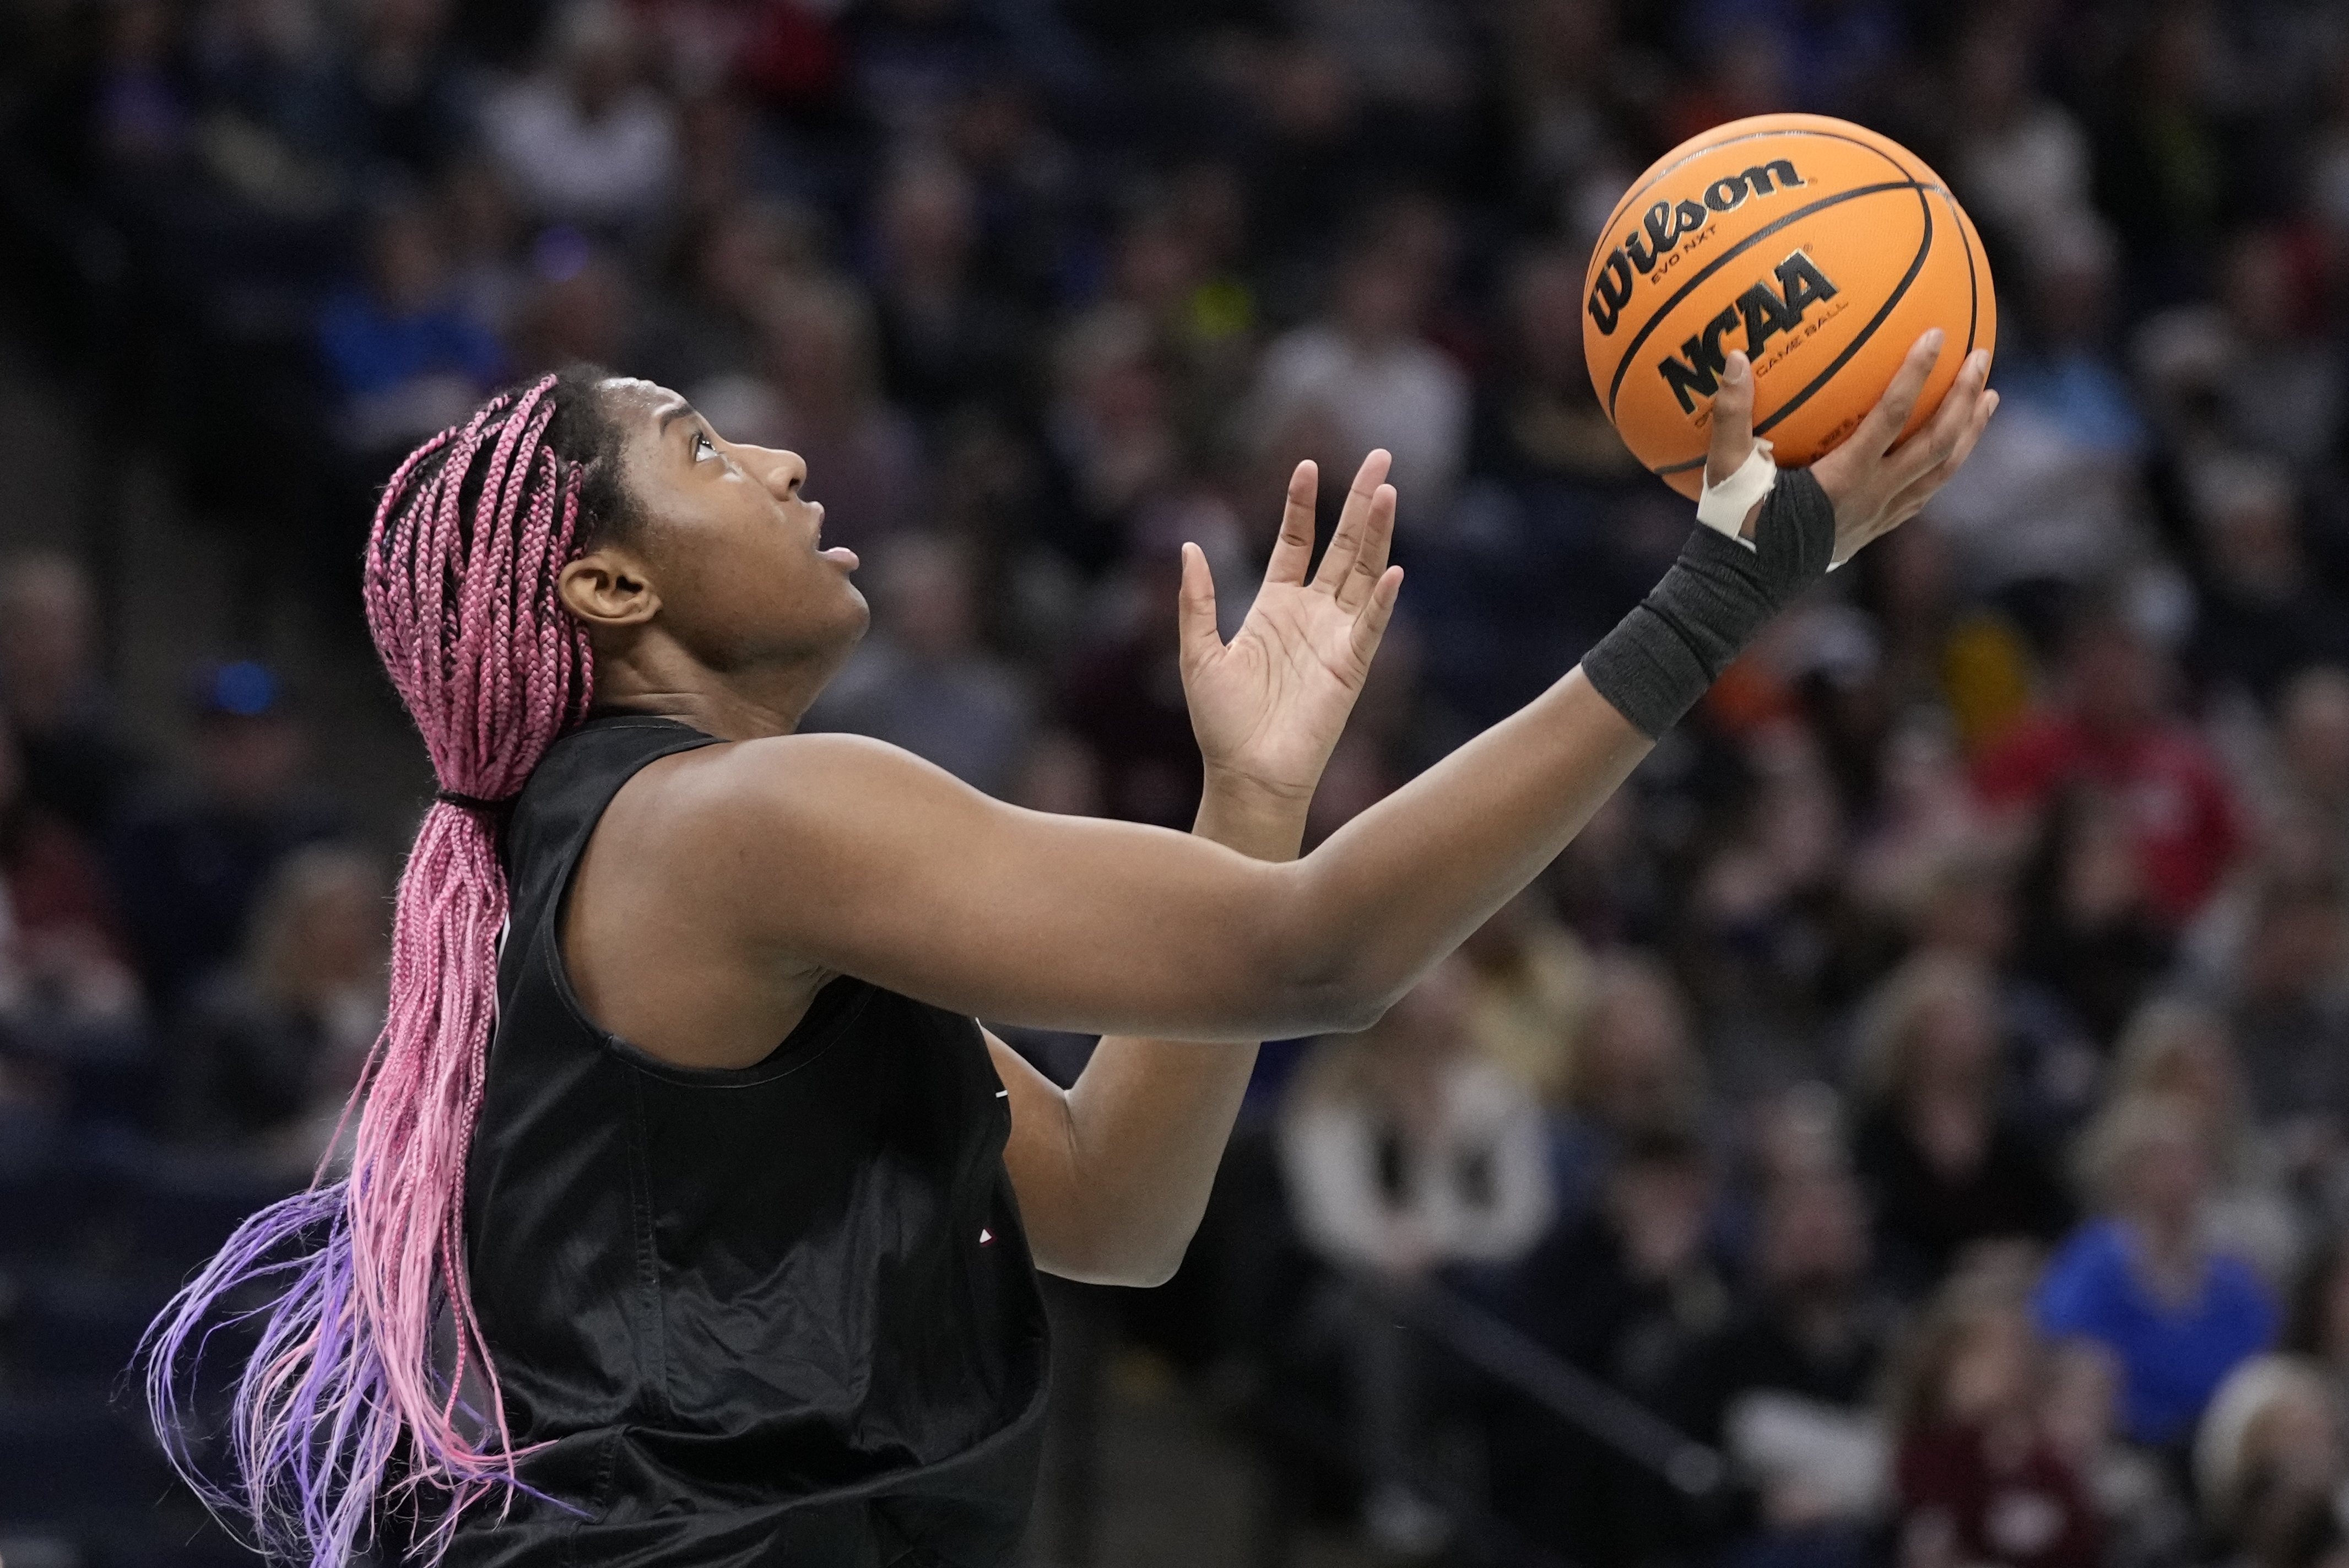 WNBA draft 2023 free live stream, TV channel, draft order, how to watch online without cable